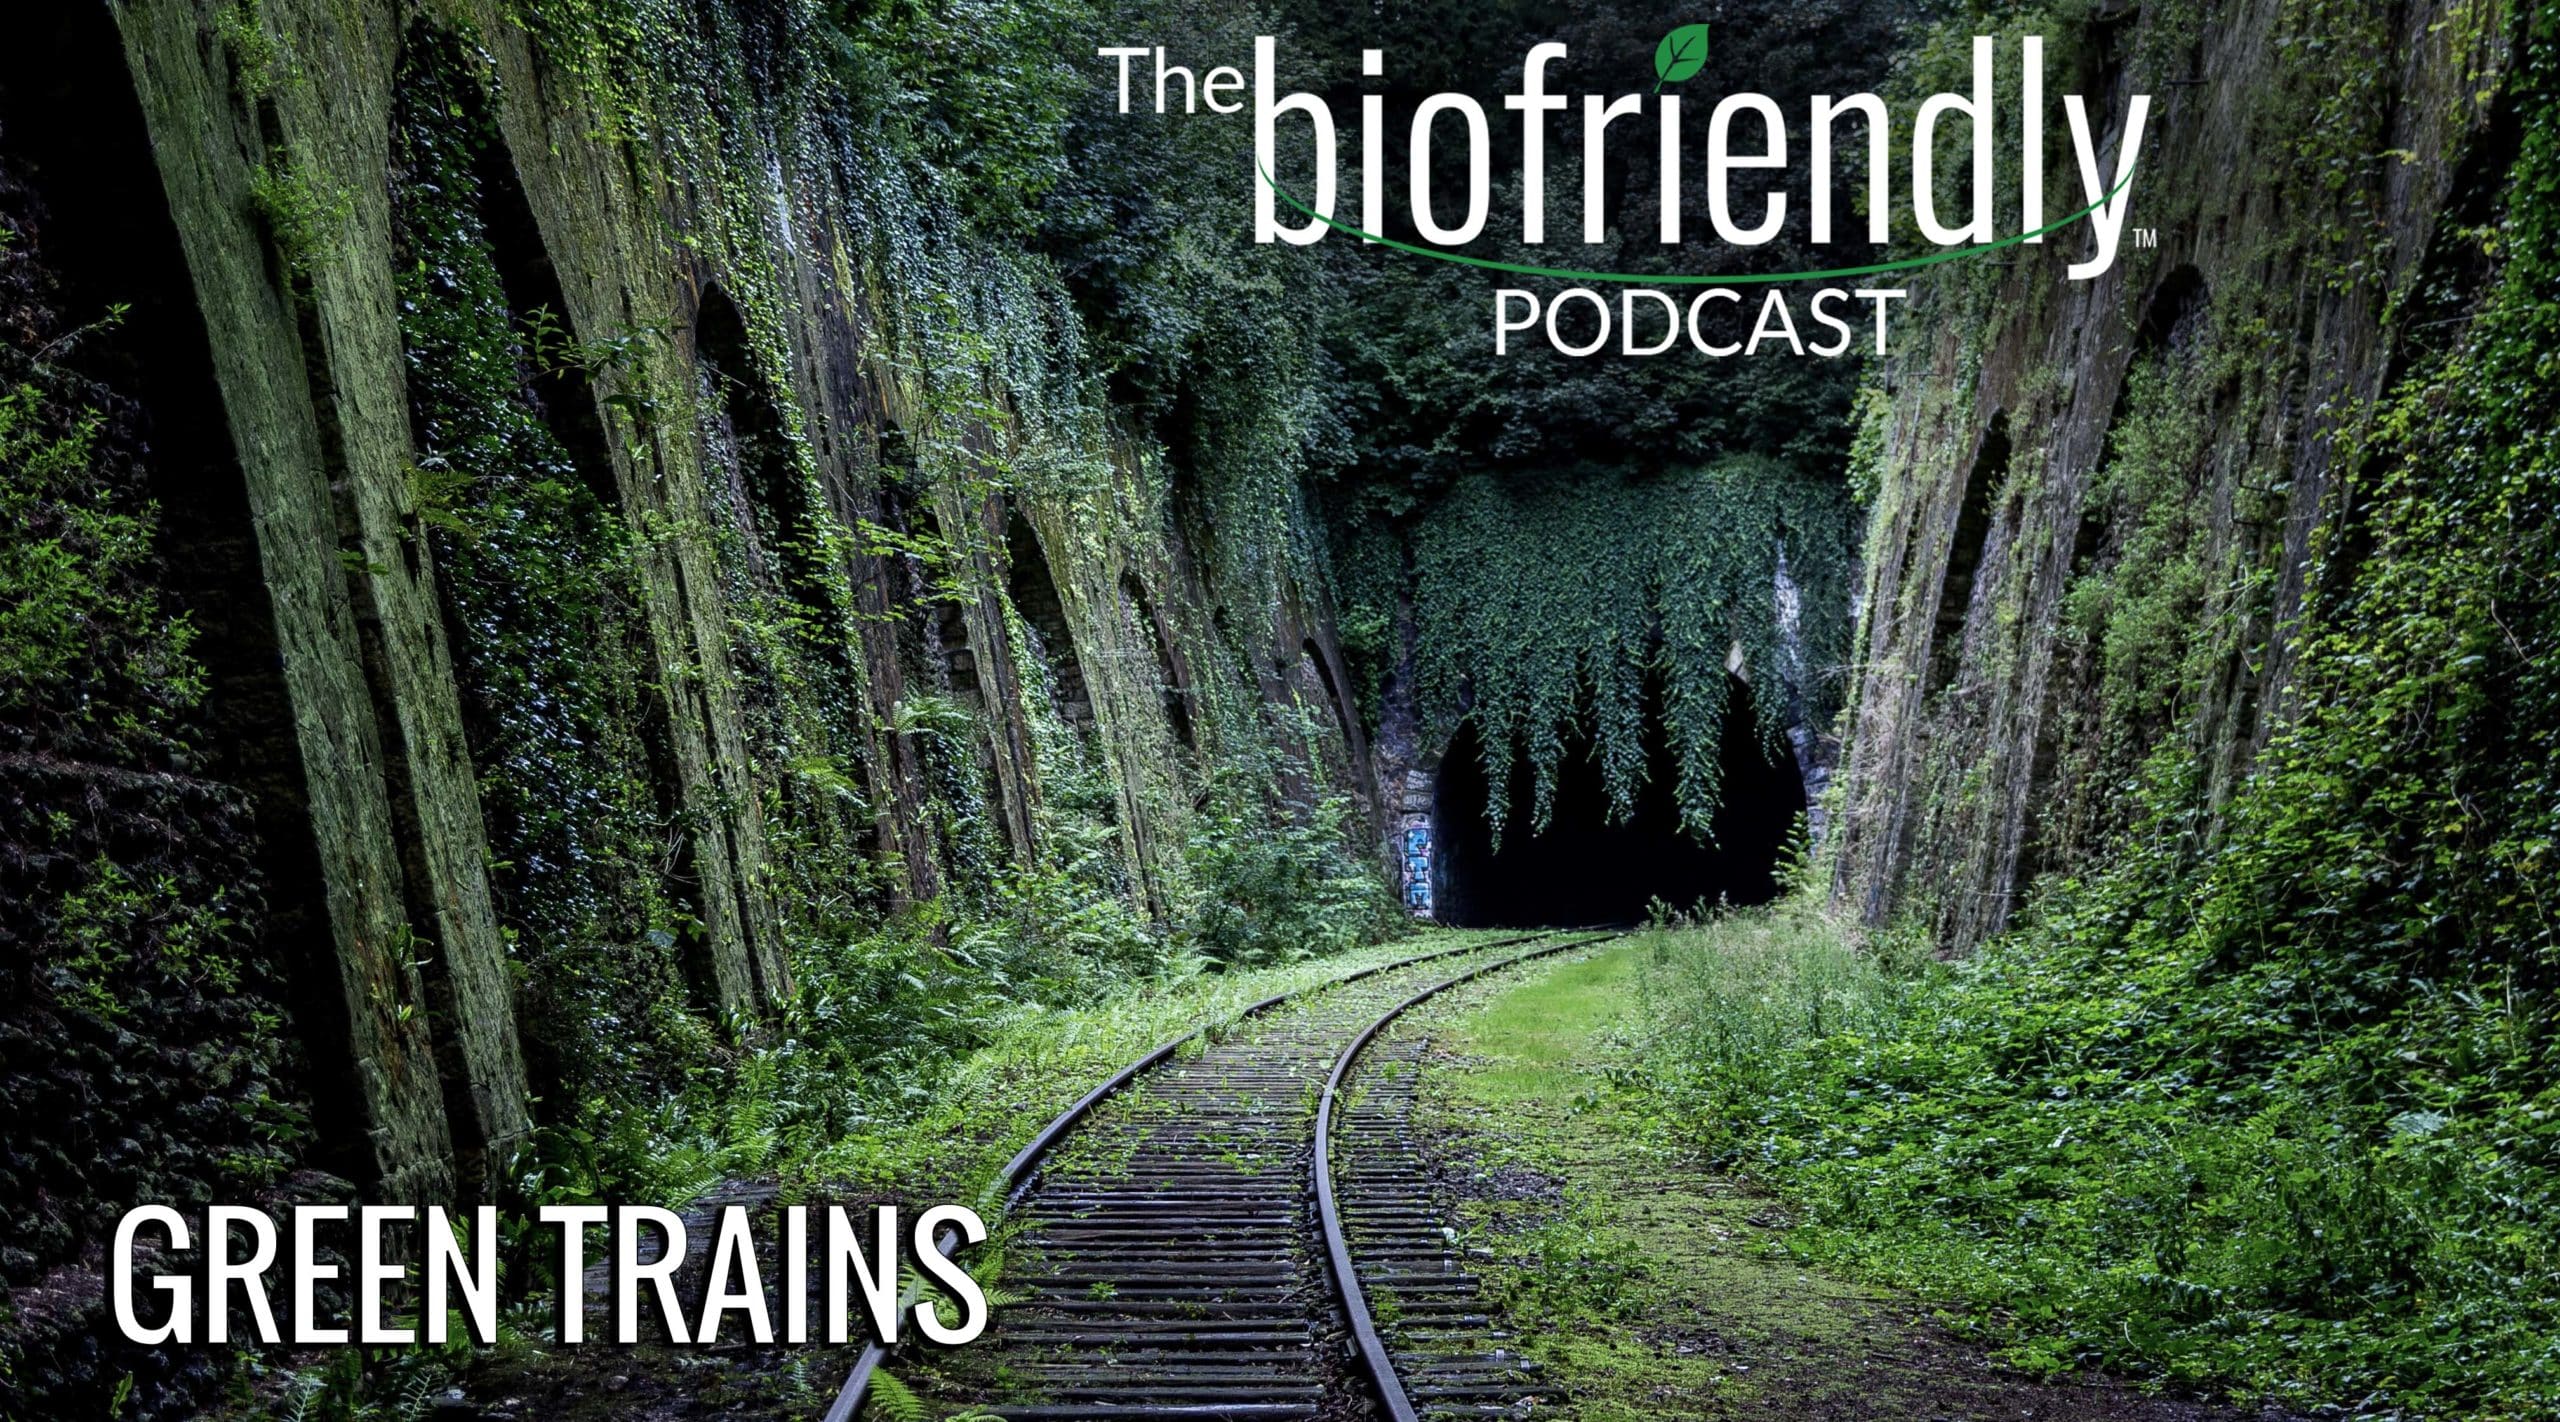 The Biofriendly Podcast - Episode 35 - Green Trains